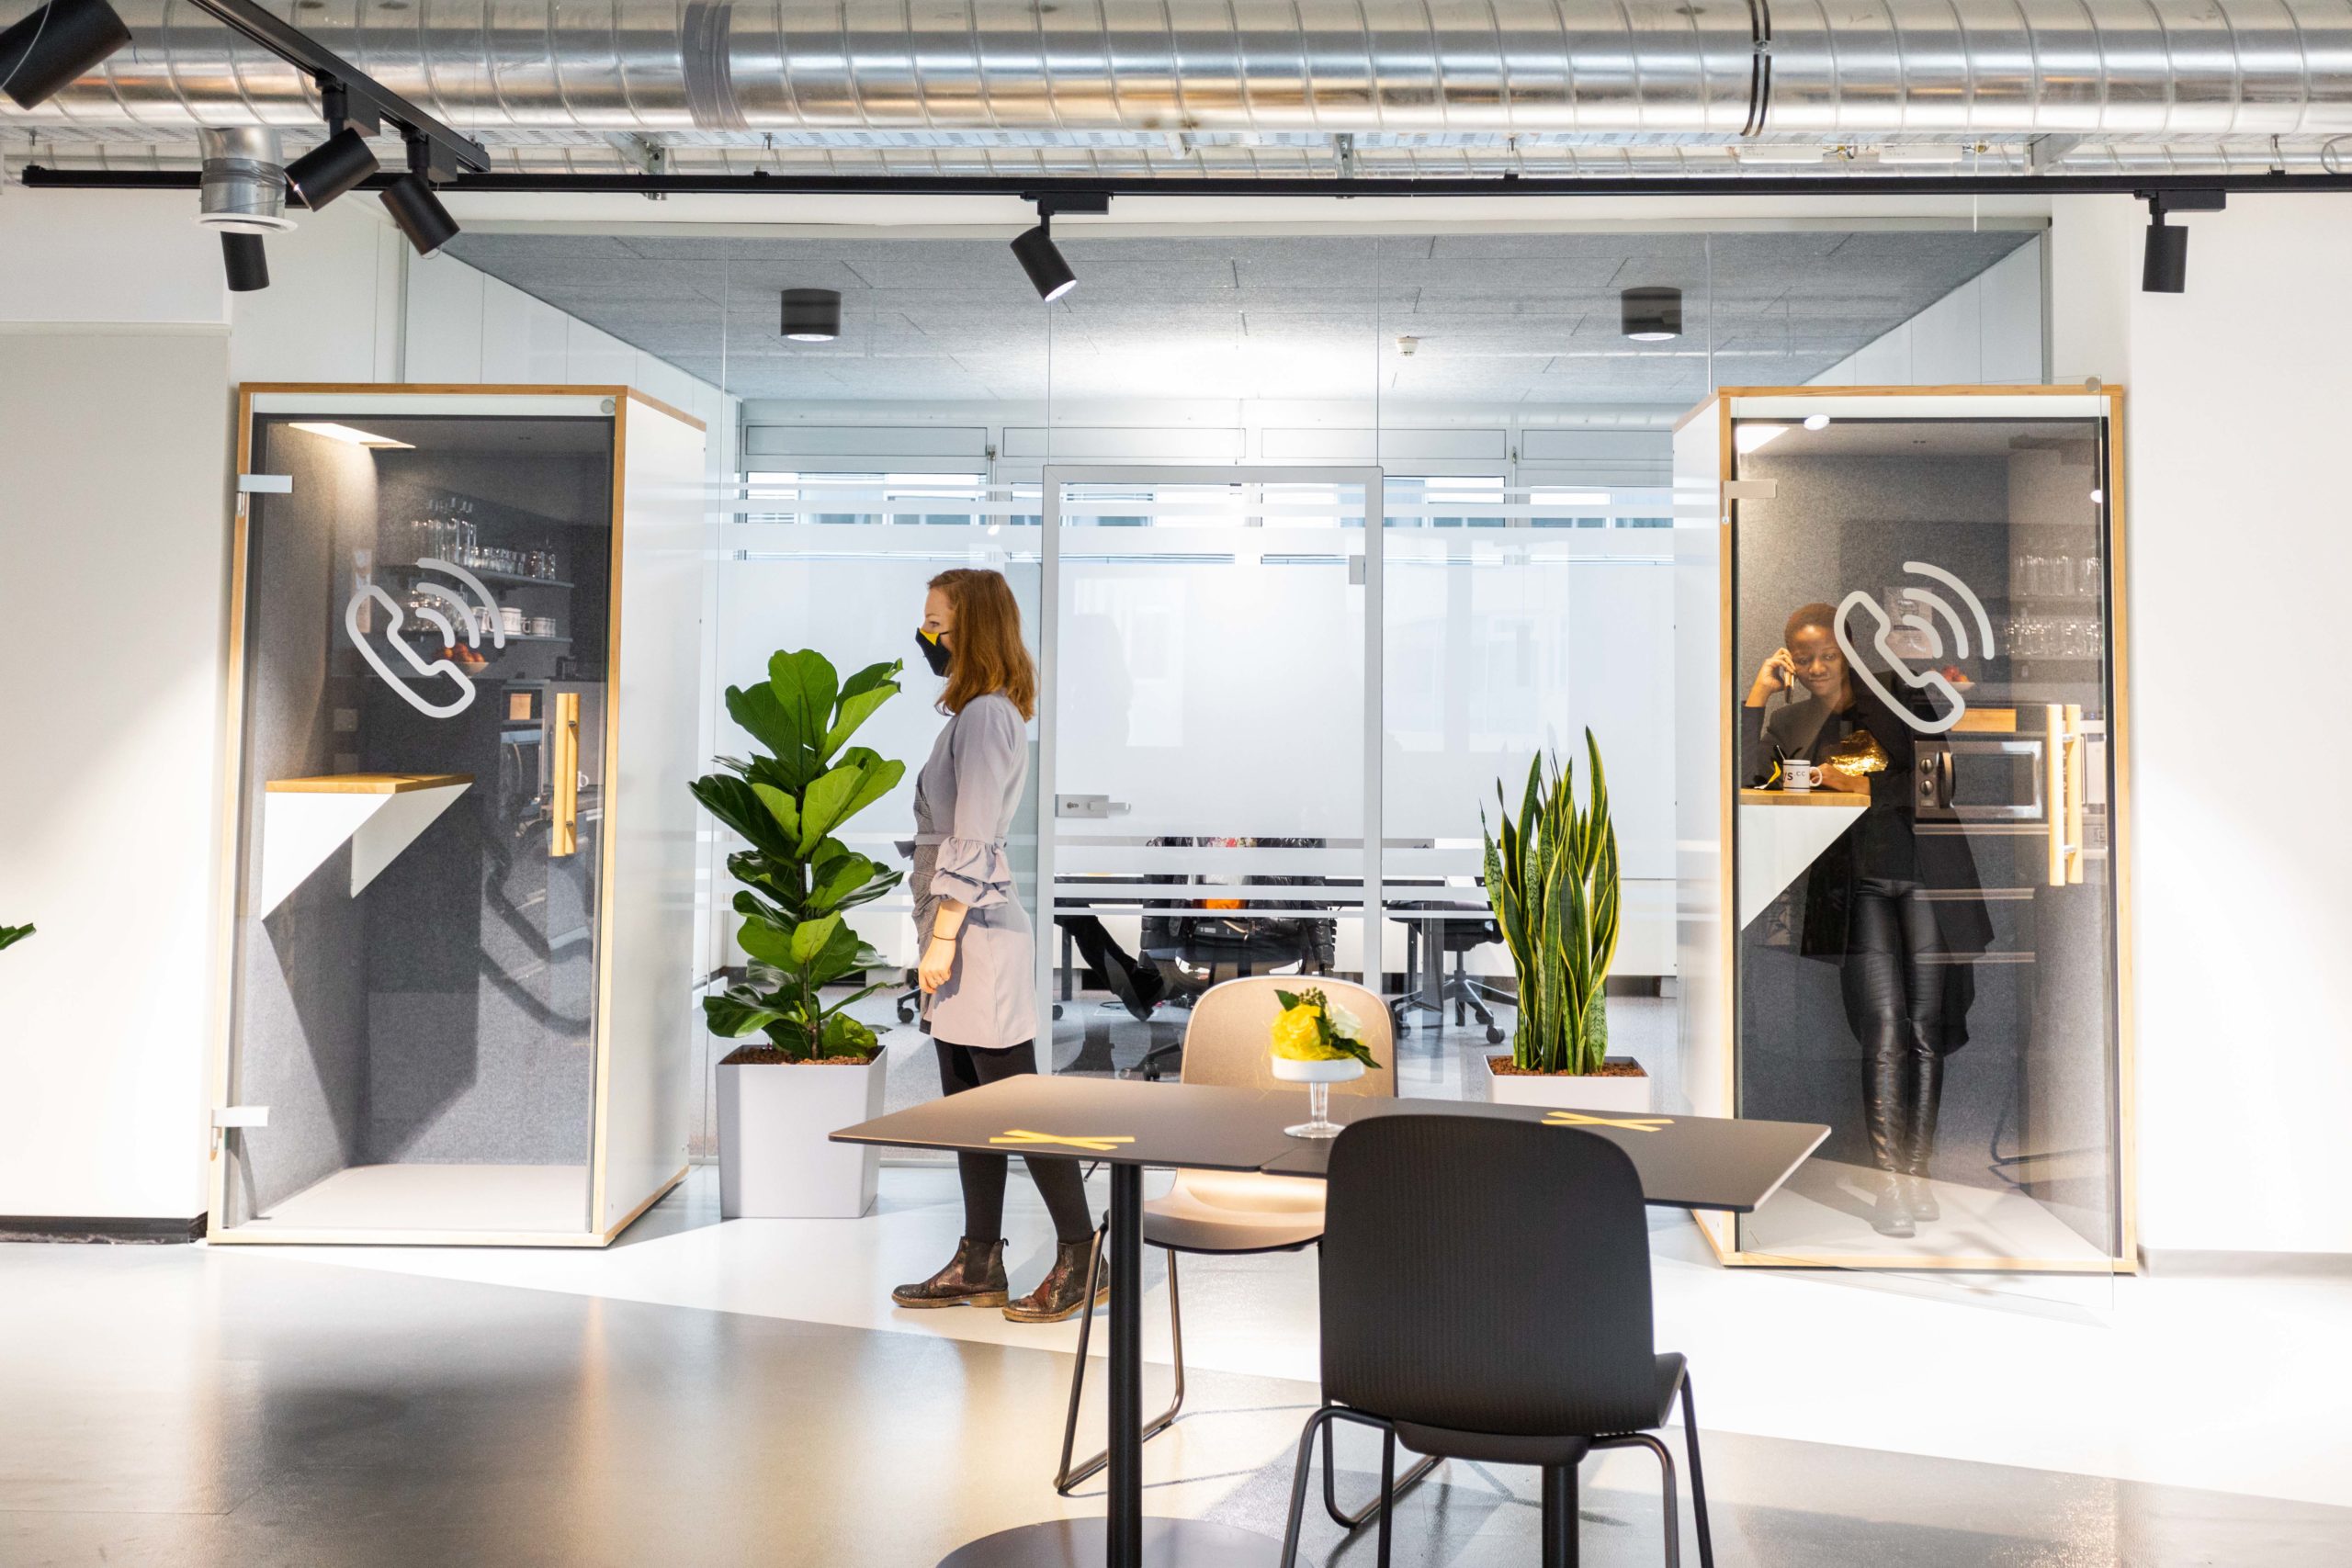 Andys.cc professionell arbeite mit Phone-Booths und Meeting-Rooms